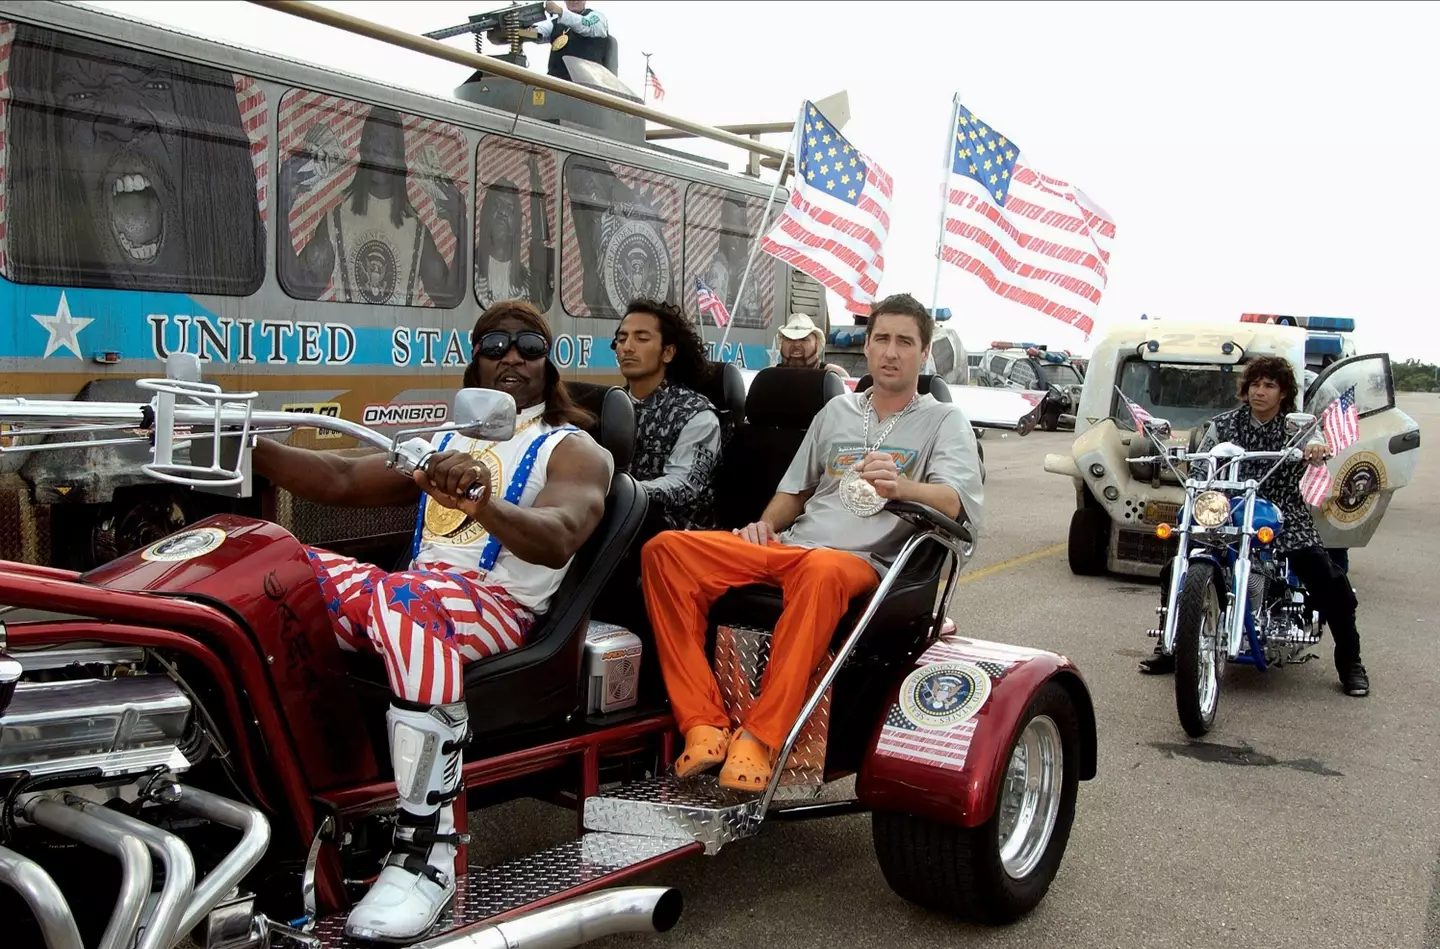 Idiocracy, a film from 2006 is being used to describe life today.